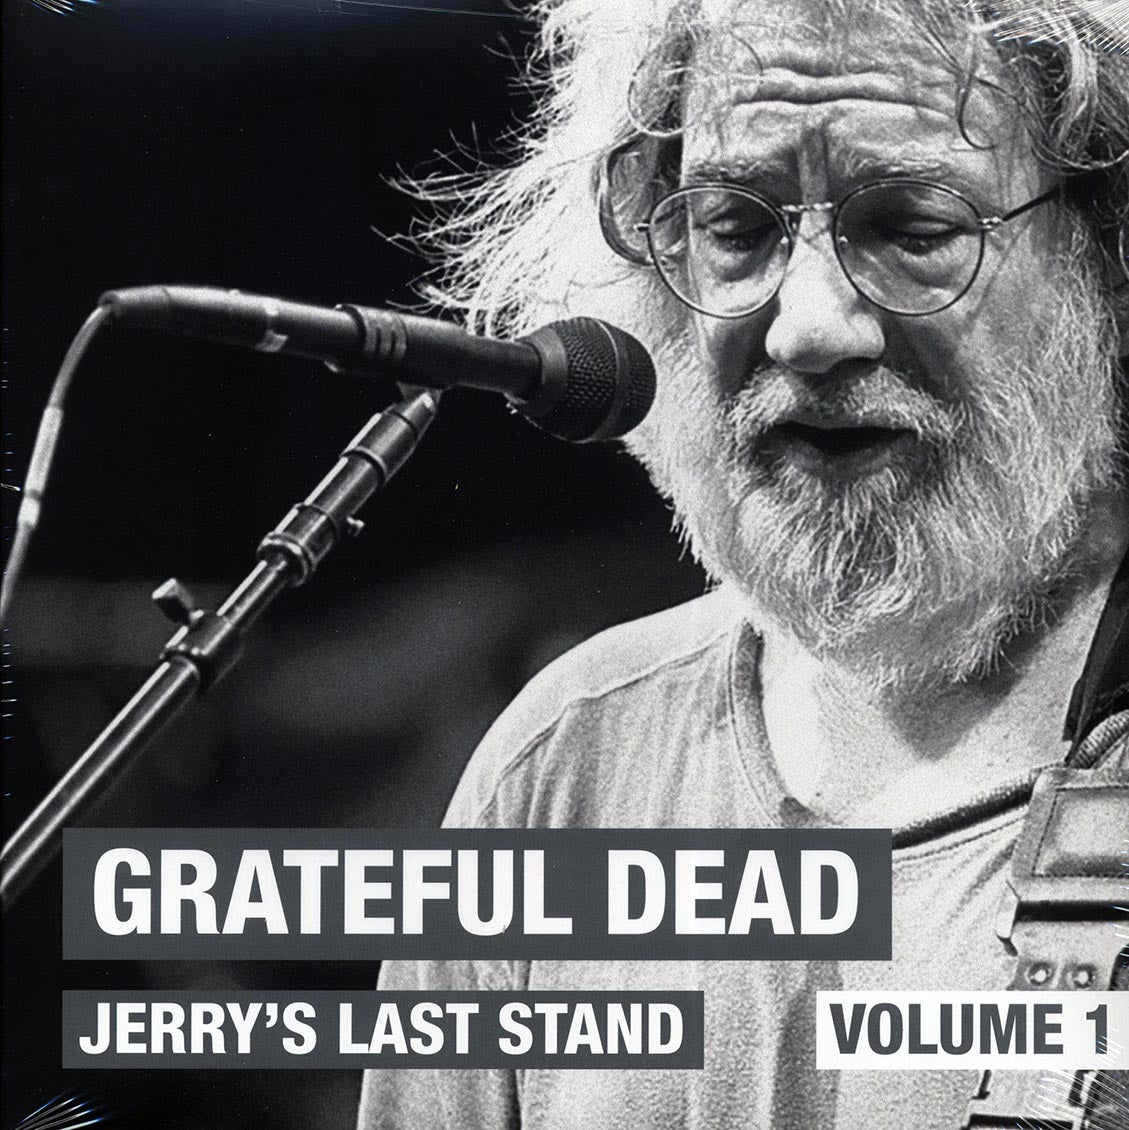 Grateful Dead - Jerry's Last Stand Volume 1: Soldier Field, Chicago, July 9th, 1995